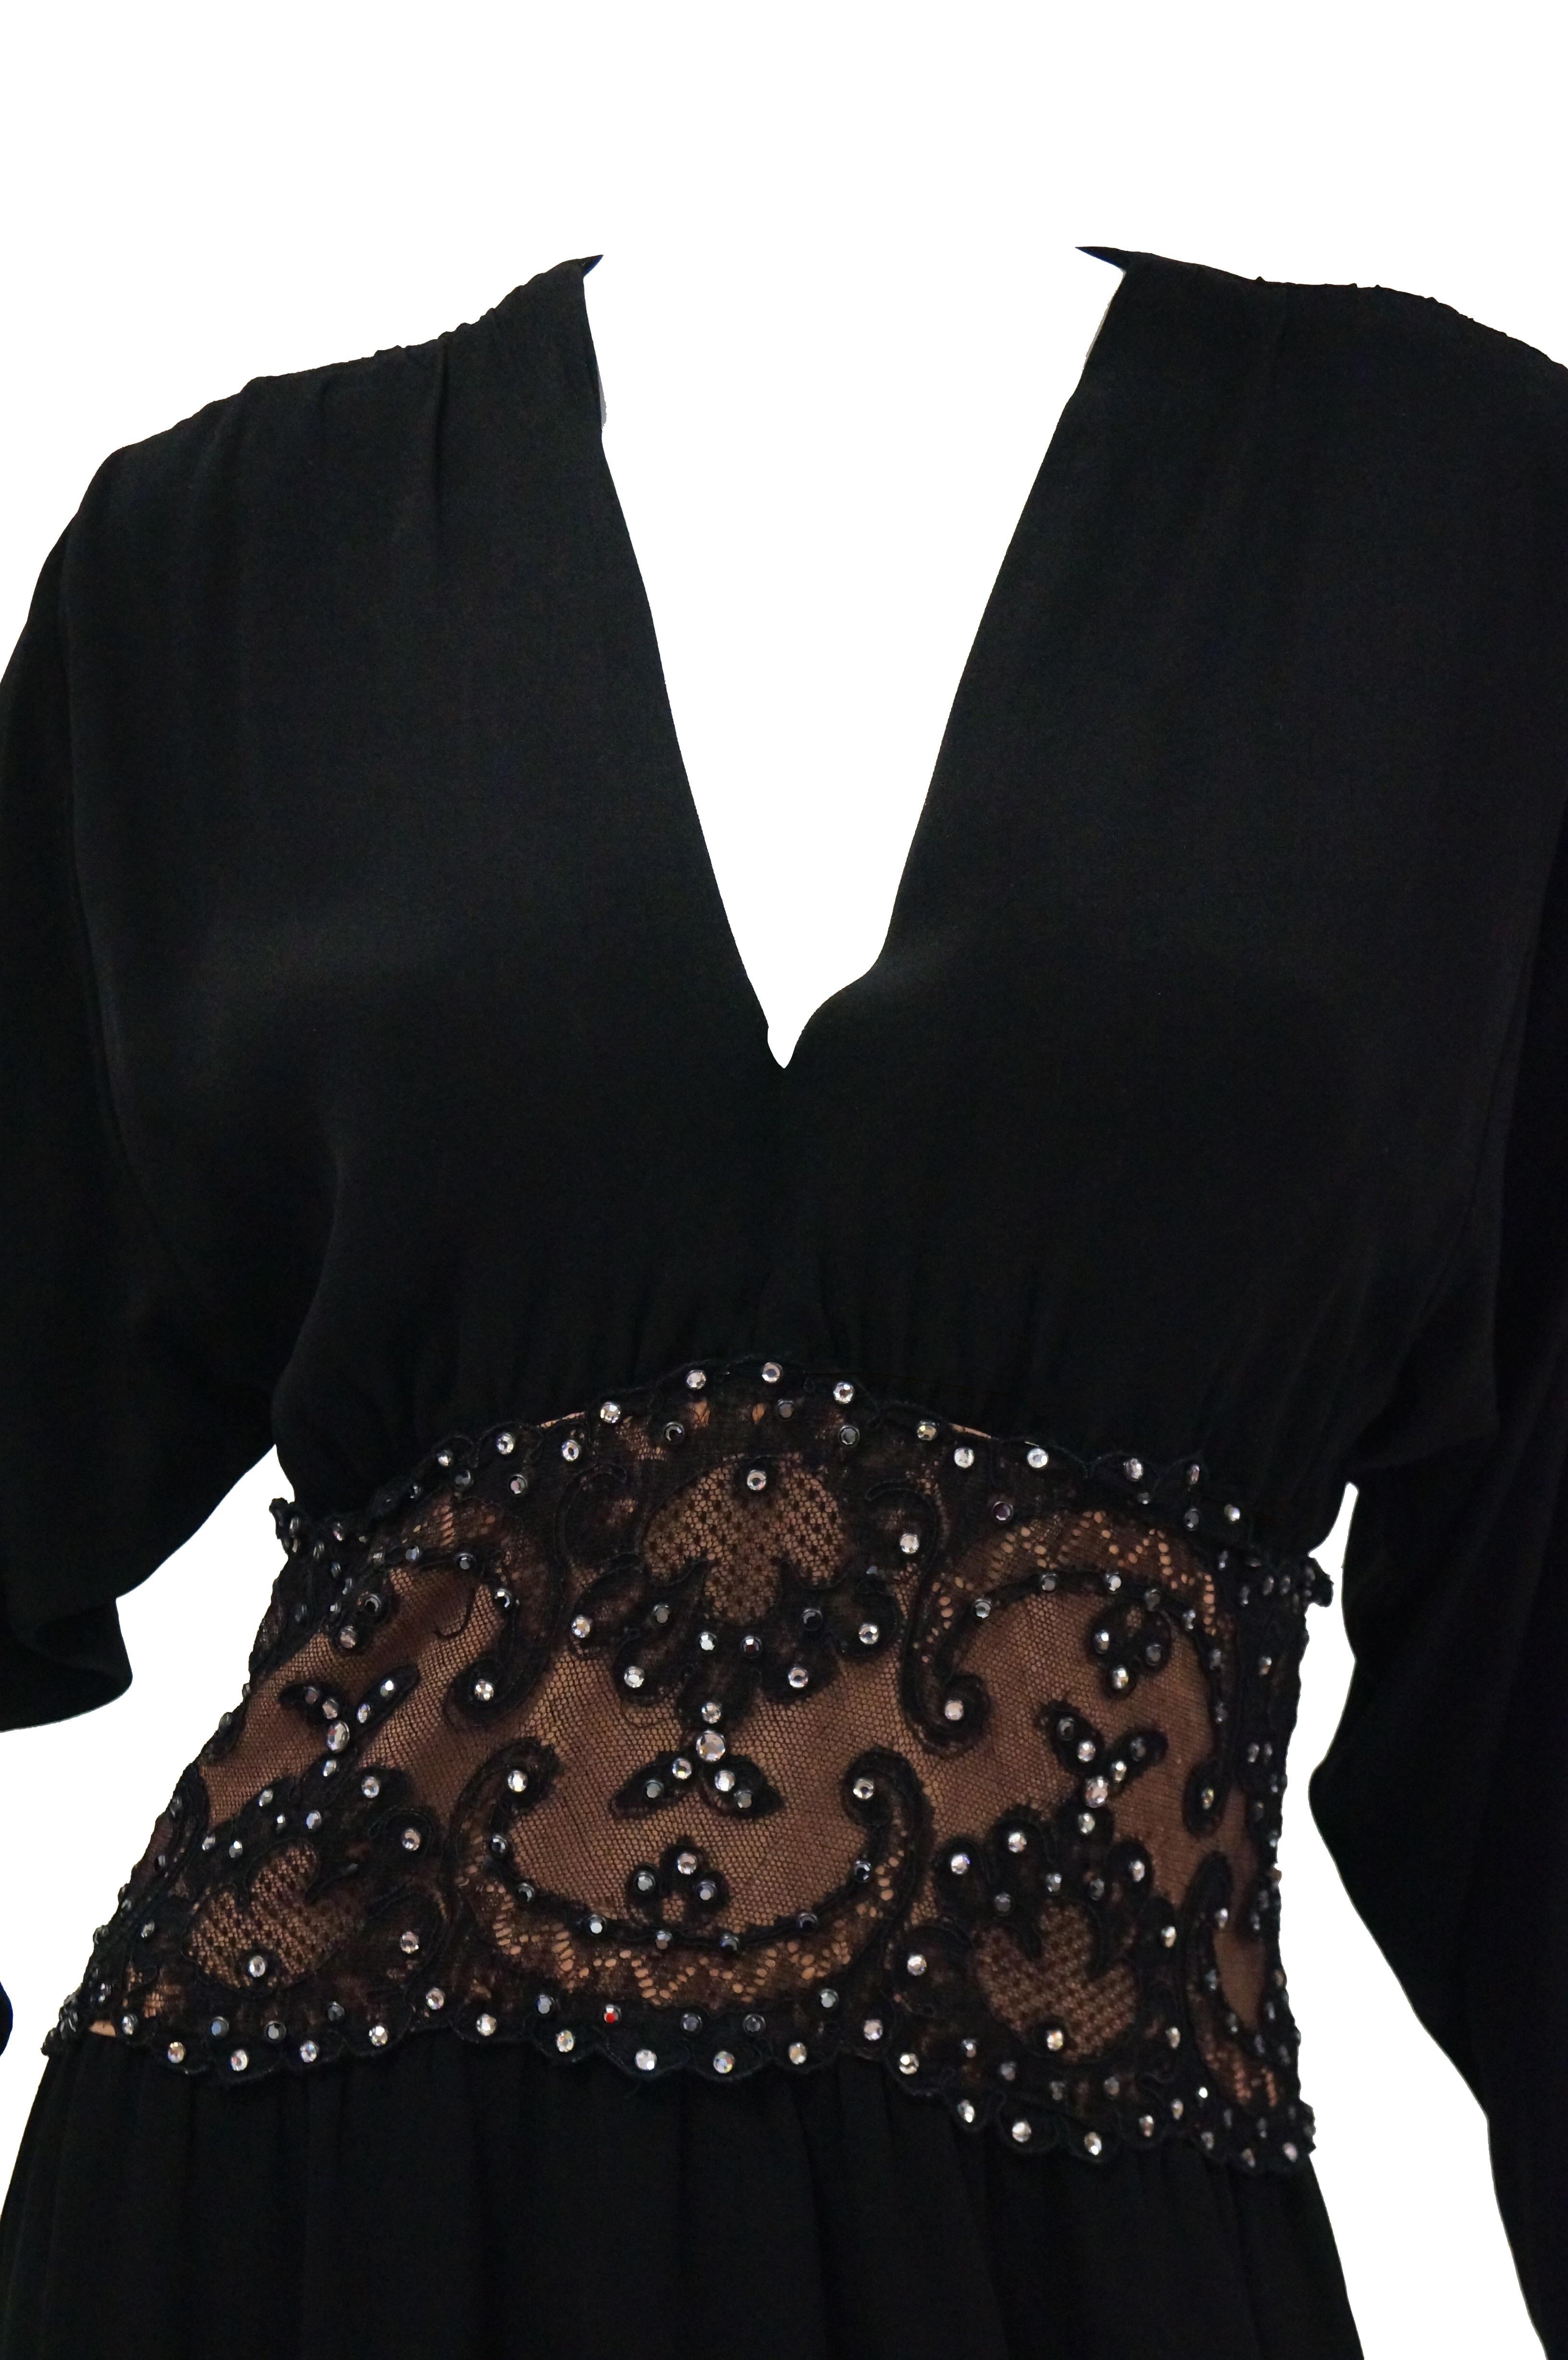 Stunning black silk cocktail dress by Bob Mackie. The dress falls at the knee, has long batwing sleeves with a narrow cuff, a plunging V - neckline, and a loose pencil skirt. The dress has a cinched waist accented by a wide lace band over a peach